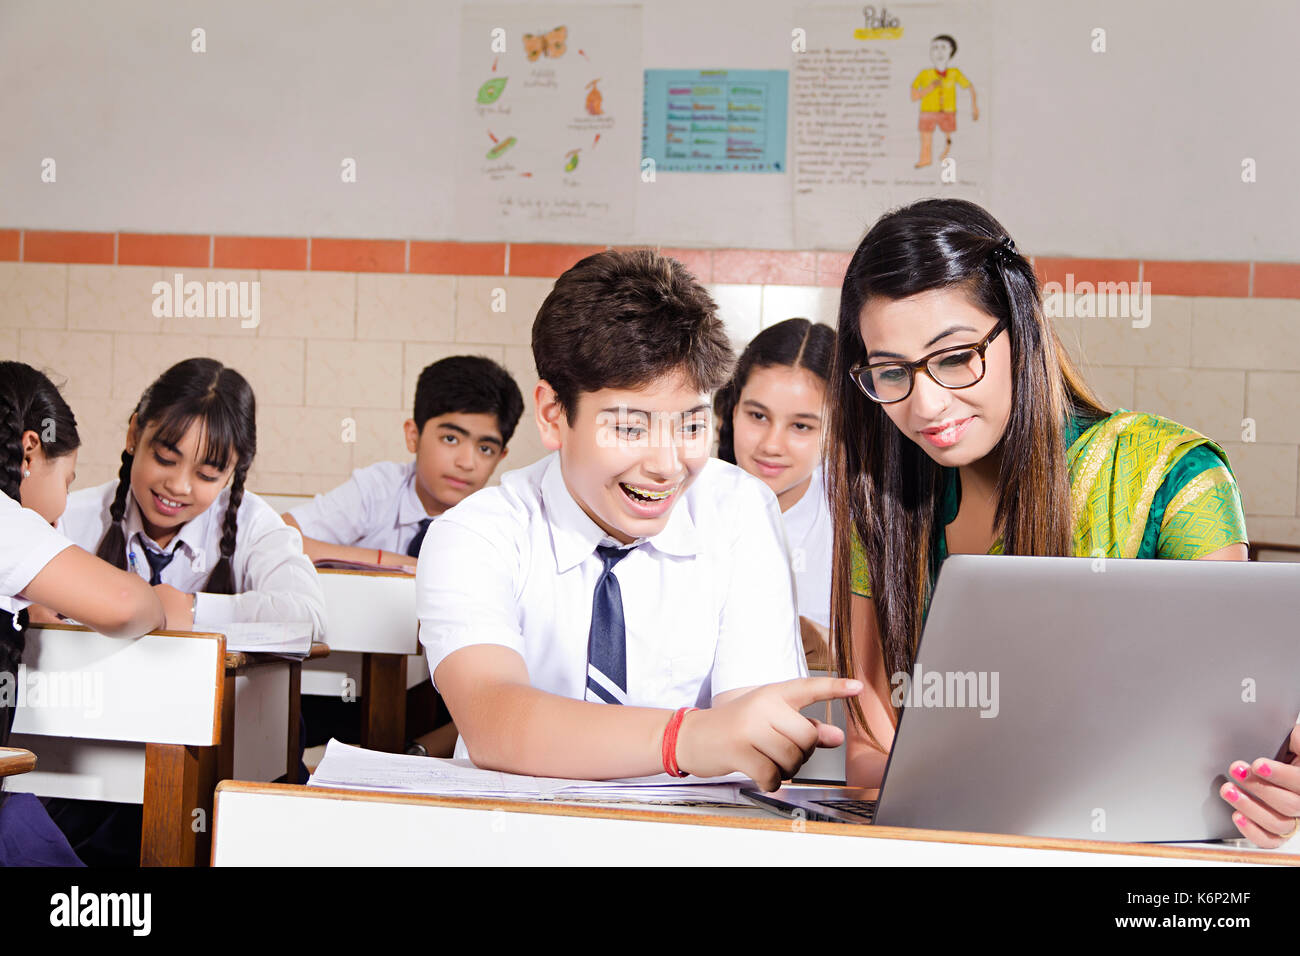 Indian School Boy Student And Teacher Laptop Studying E-Learning In Class Stock Photo